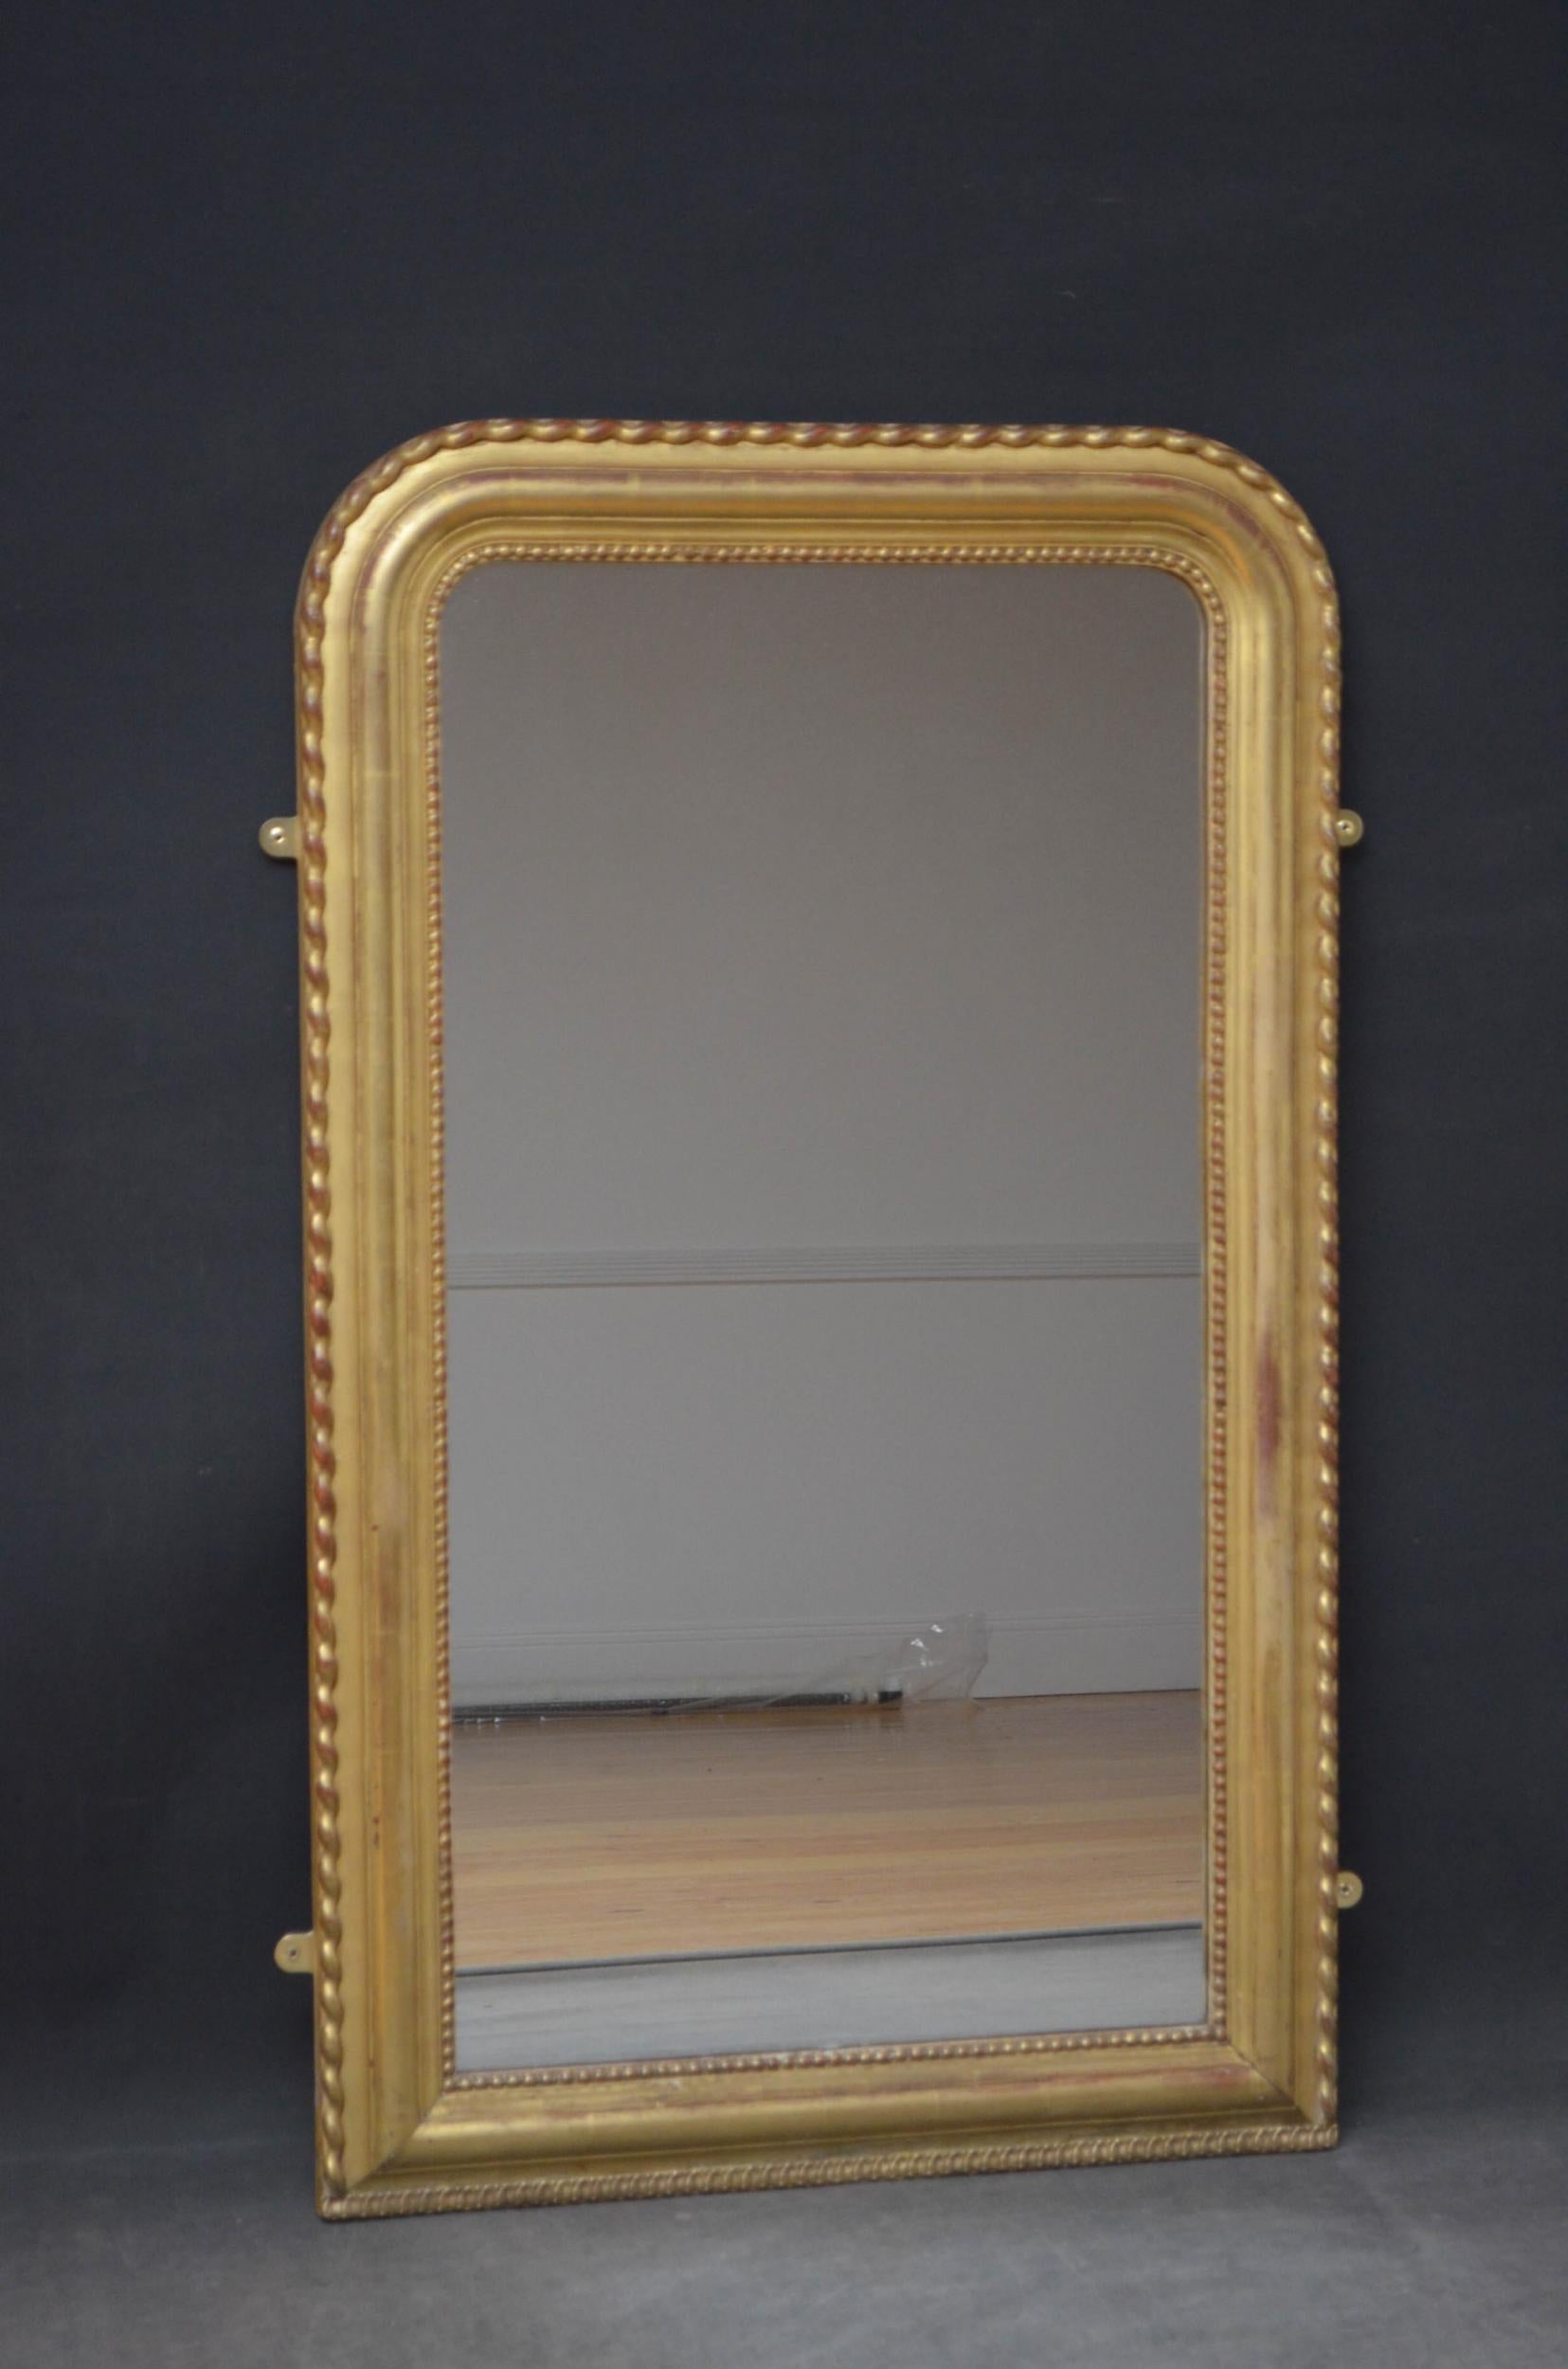 Sn4934 19th century French mirror, having original glass with some foxing and sparkle in beaded and moulded frame with minor replacements and wavy decoration to outer edge. This antique mirror retains its original glass, original gilt and original